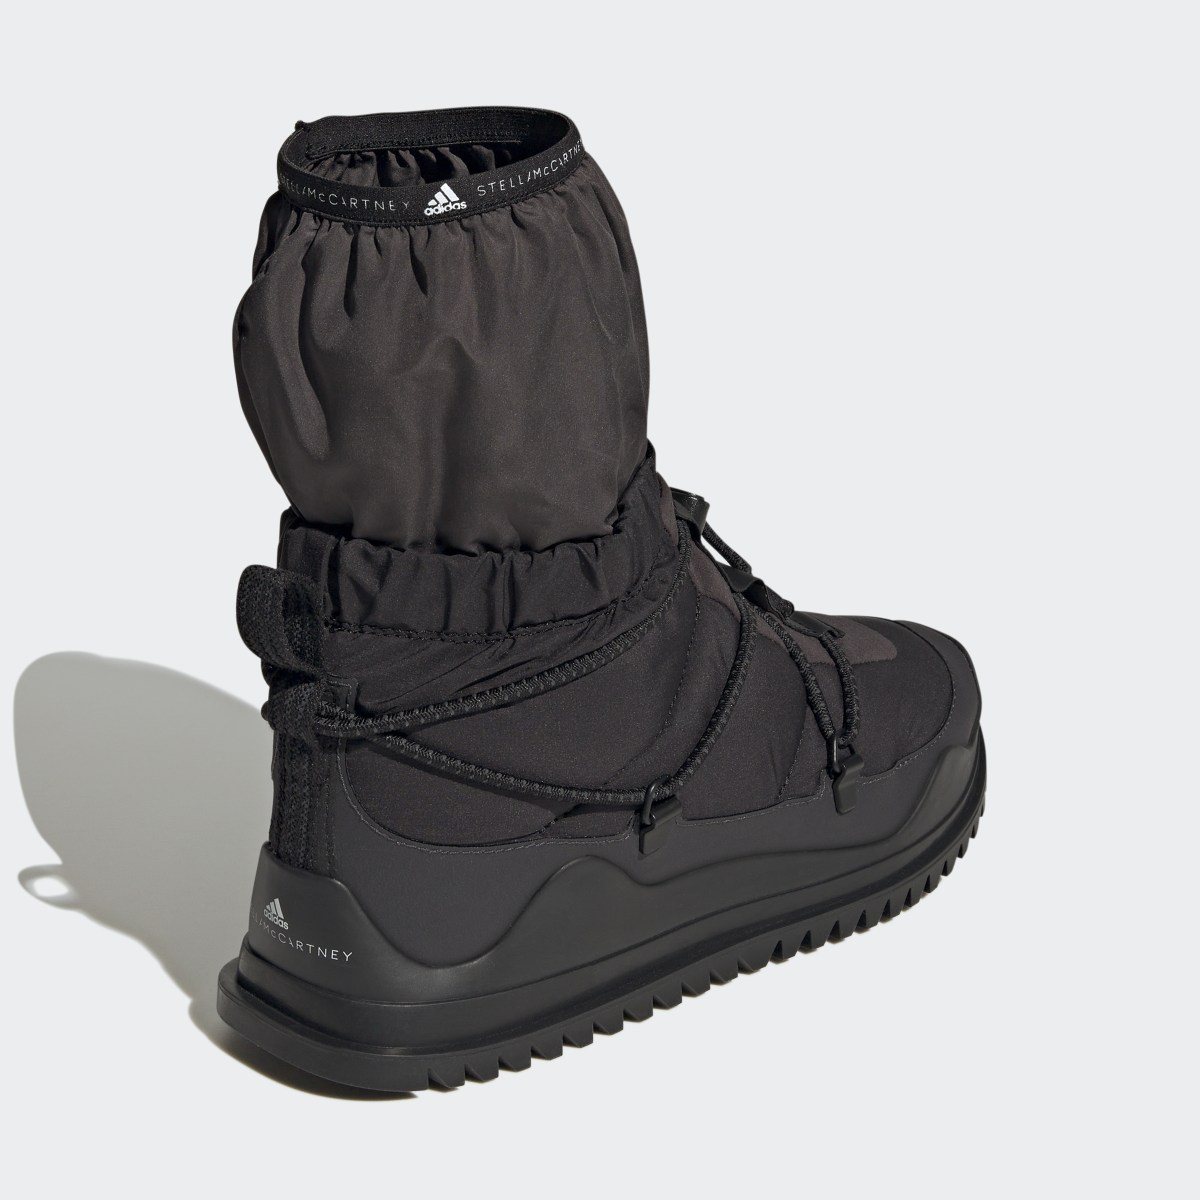 Adidas by Stella McCartney Winter COLD.RDY Boot. 6